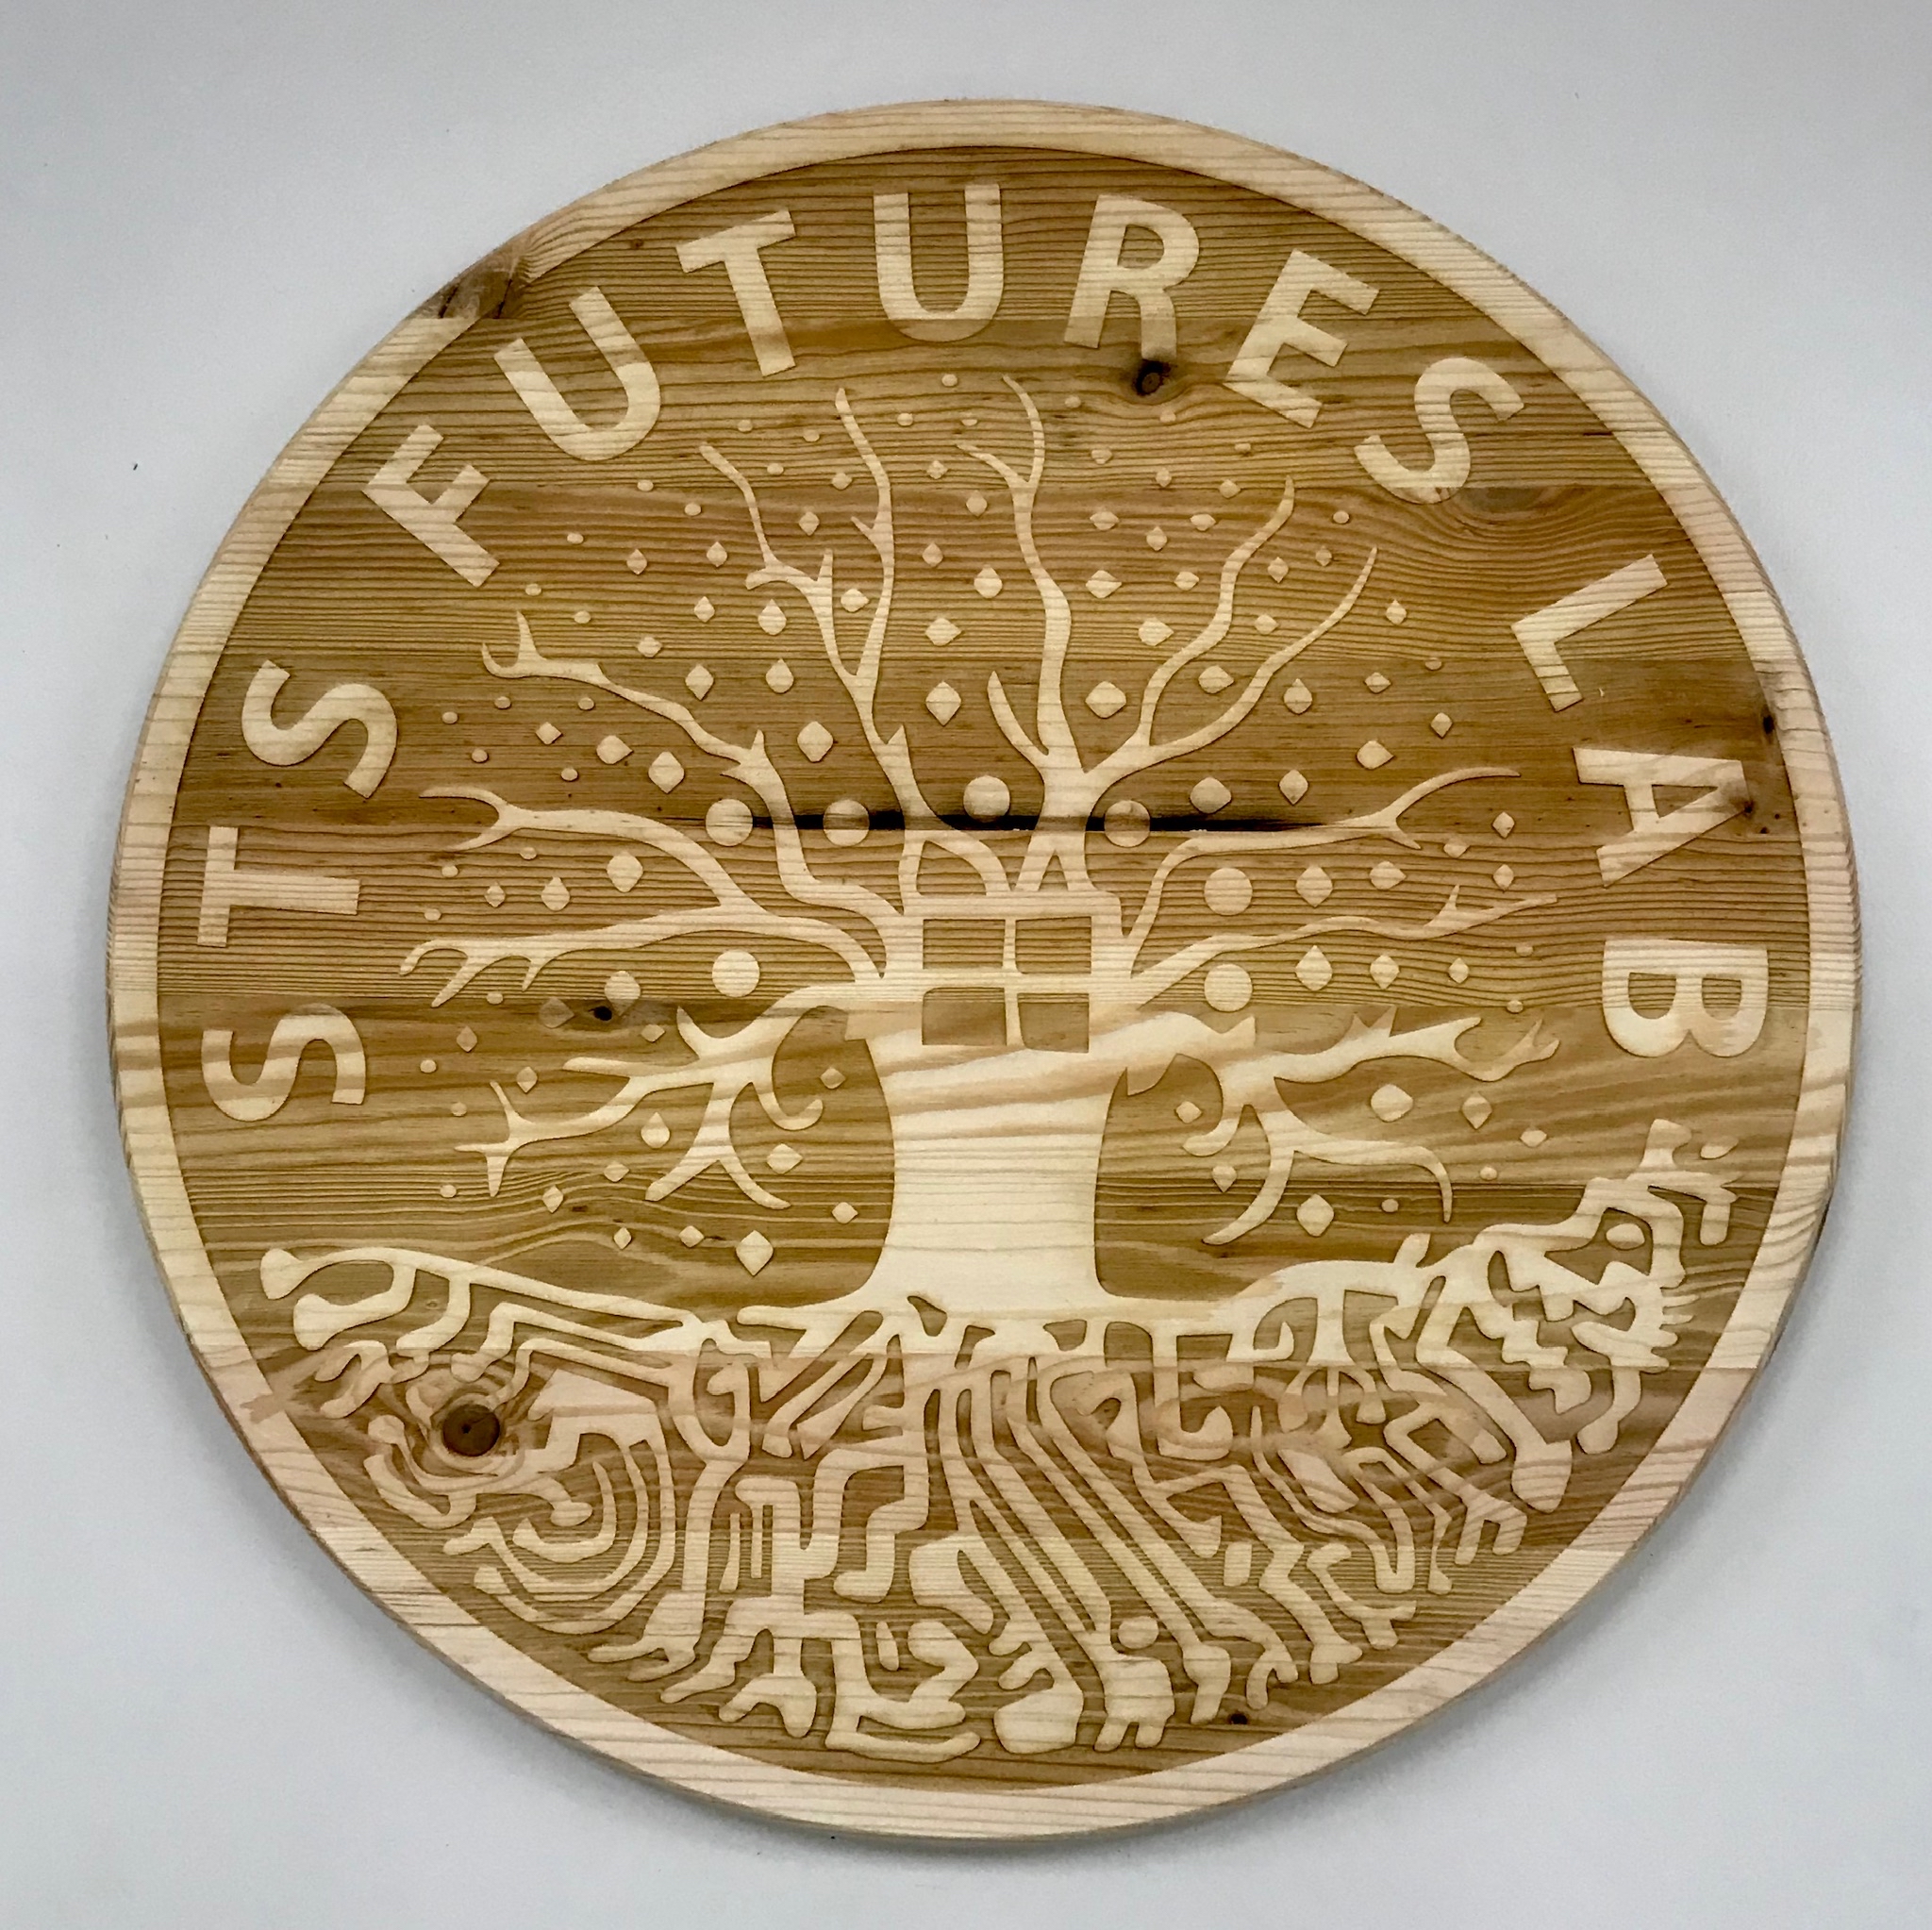 A Wood Burnout of STS Futures Lab logo